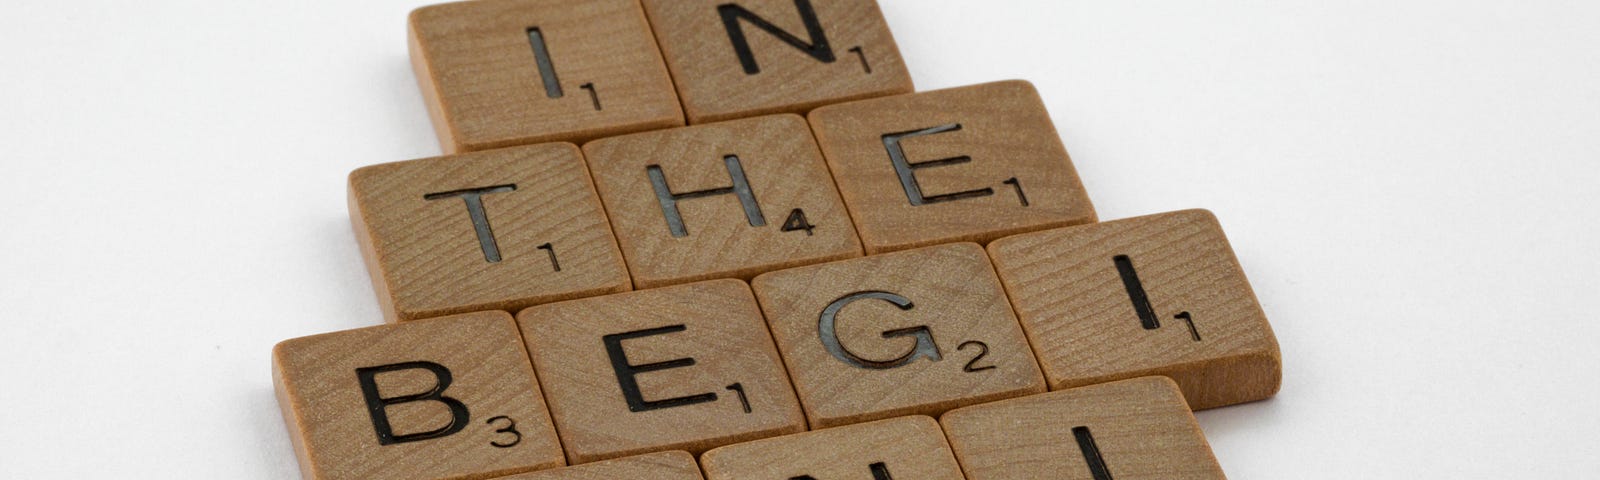 Wooden scrabble pieces arranged to read, “in the beginning”